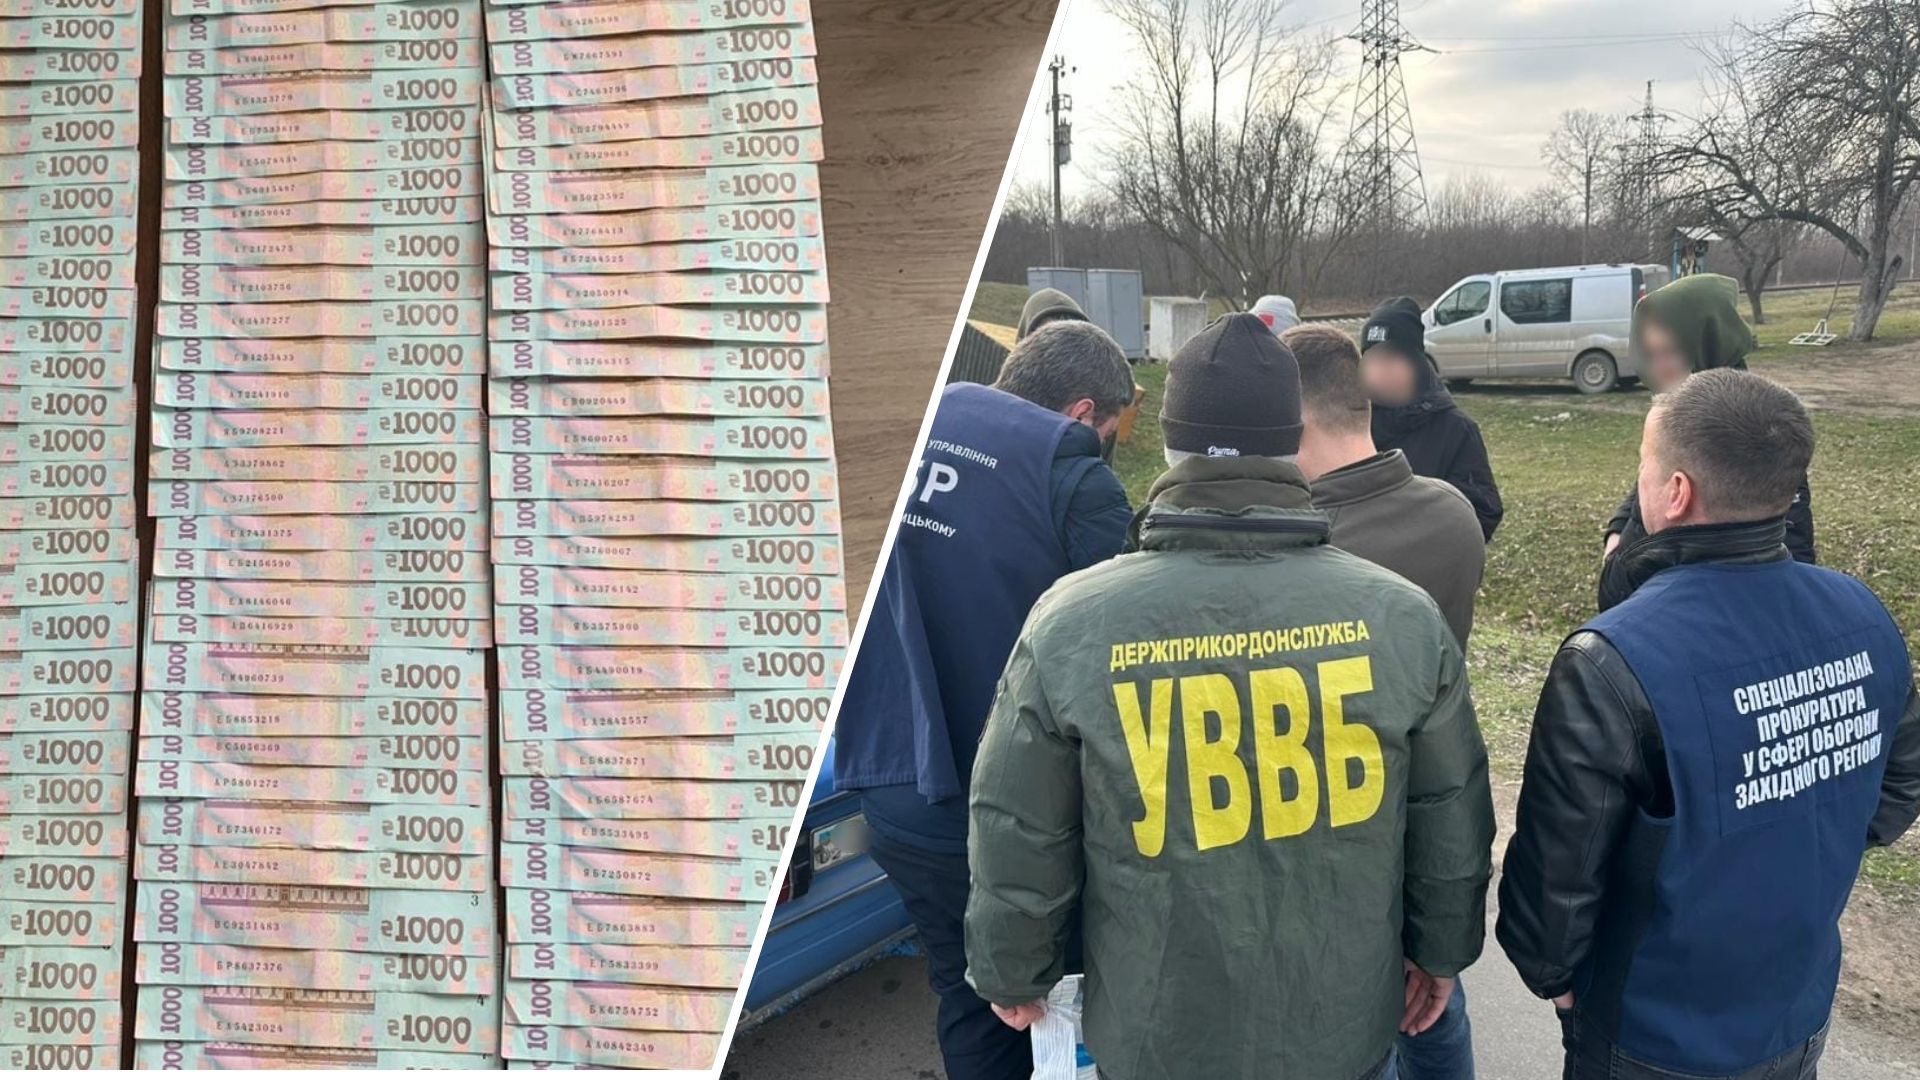 In Bukovyna, a border guard was exposed who, for a bribe, agreed to facilitate the transportation of a man of military age across the border.